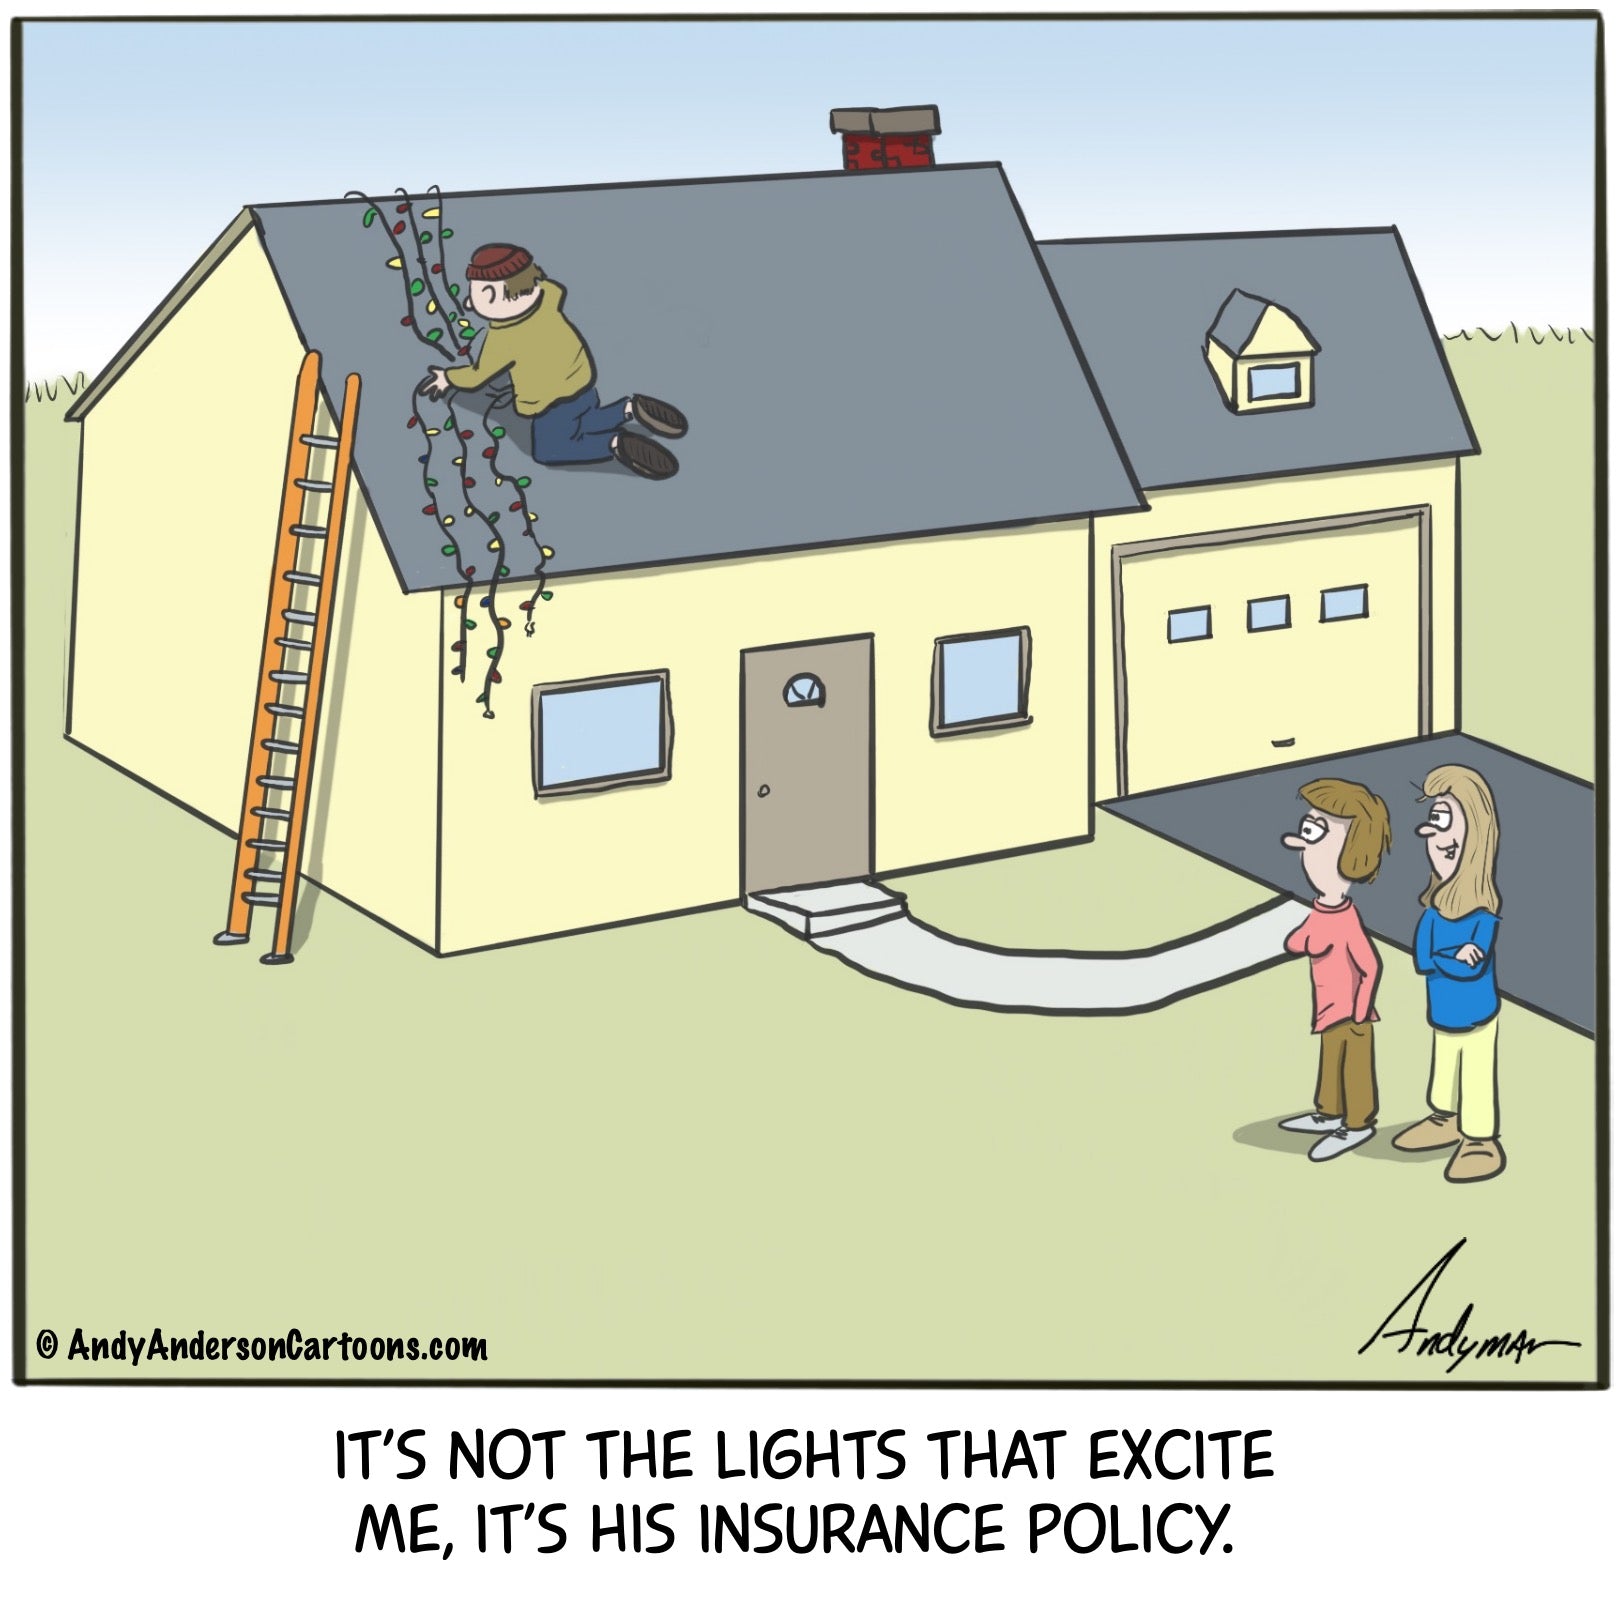 Cartoon about holiday lights and life insurance by Andy Anderson